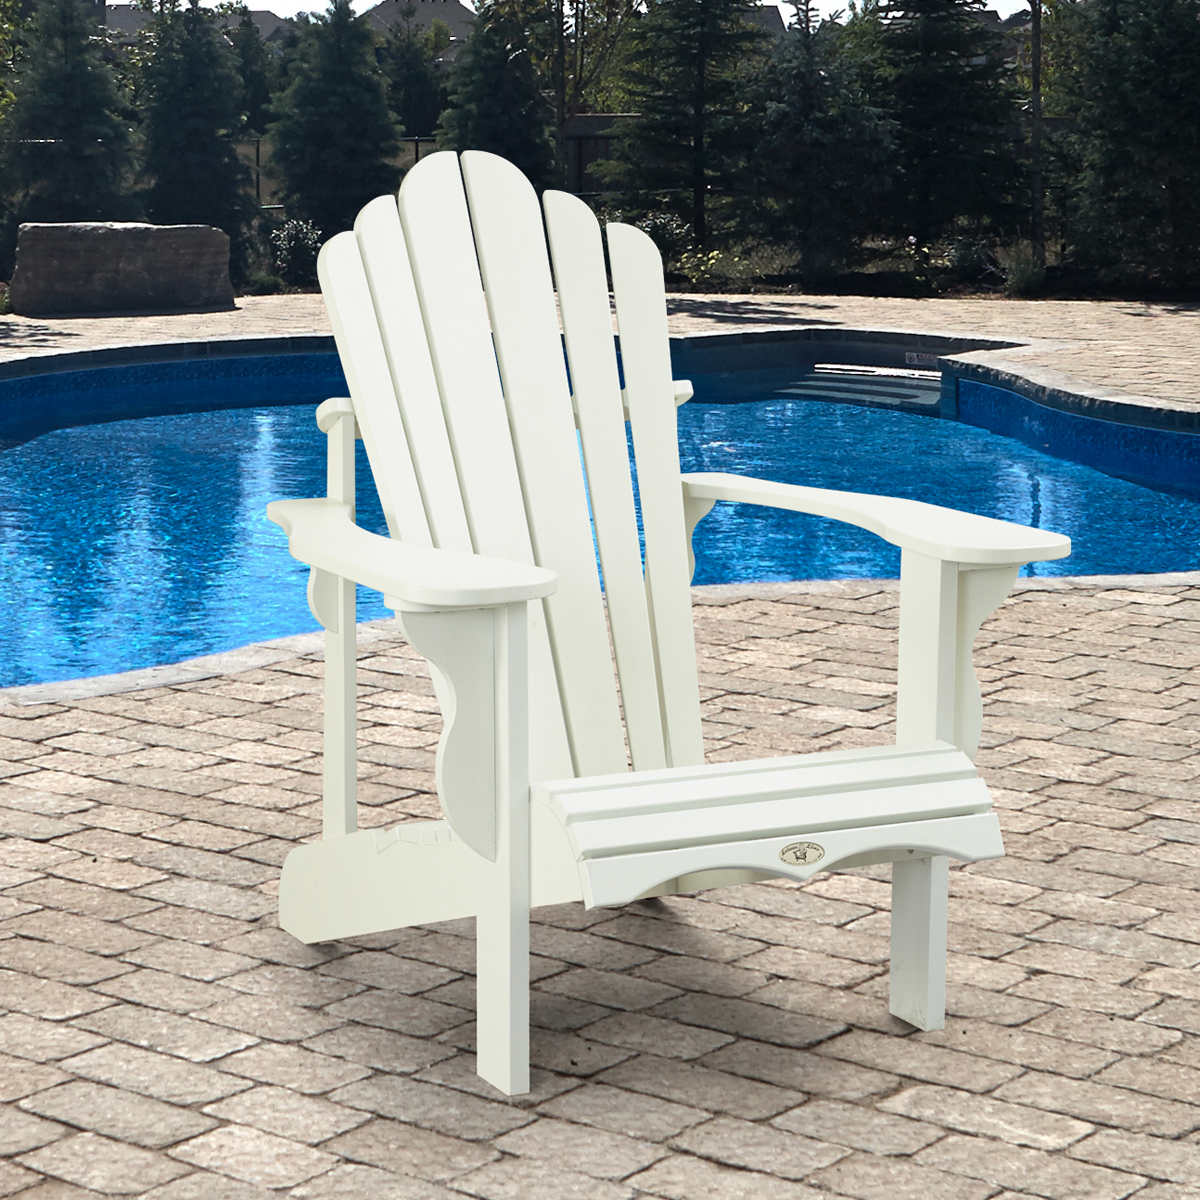 Adirondack Chair By Leisure Line Costco